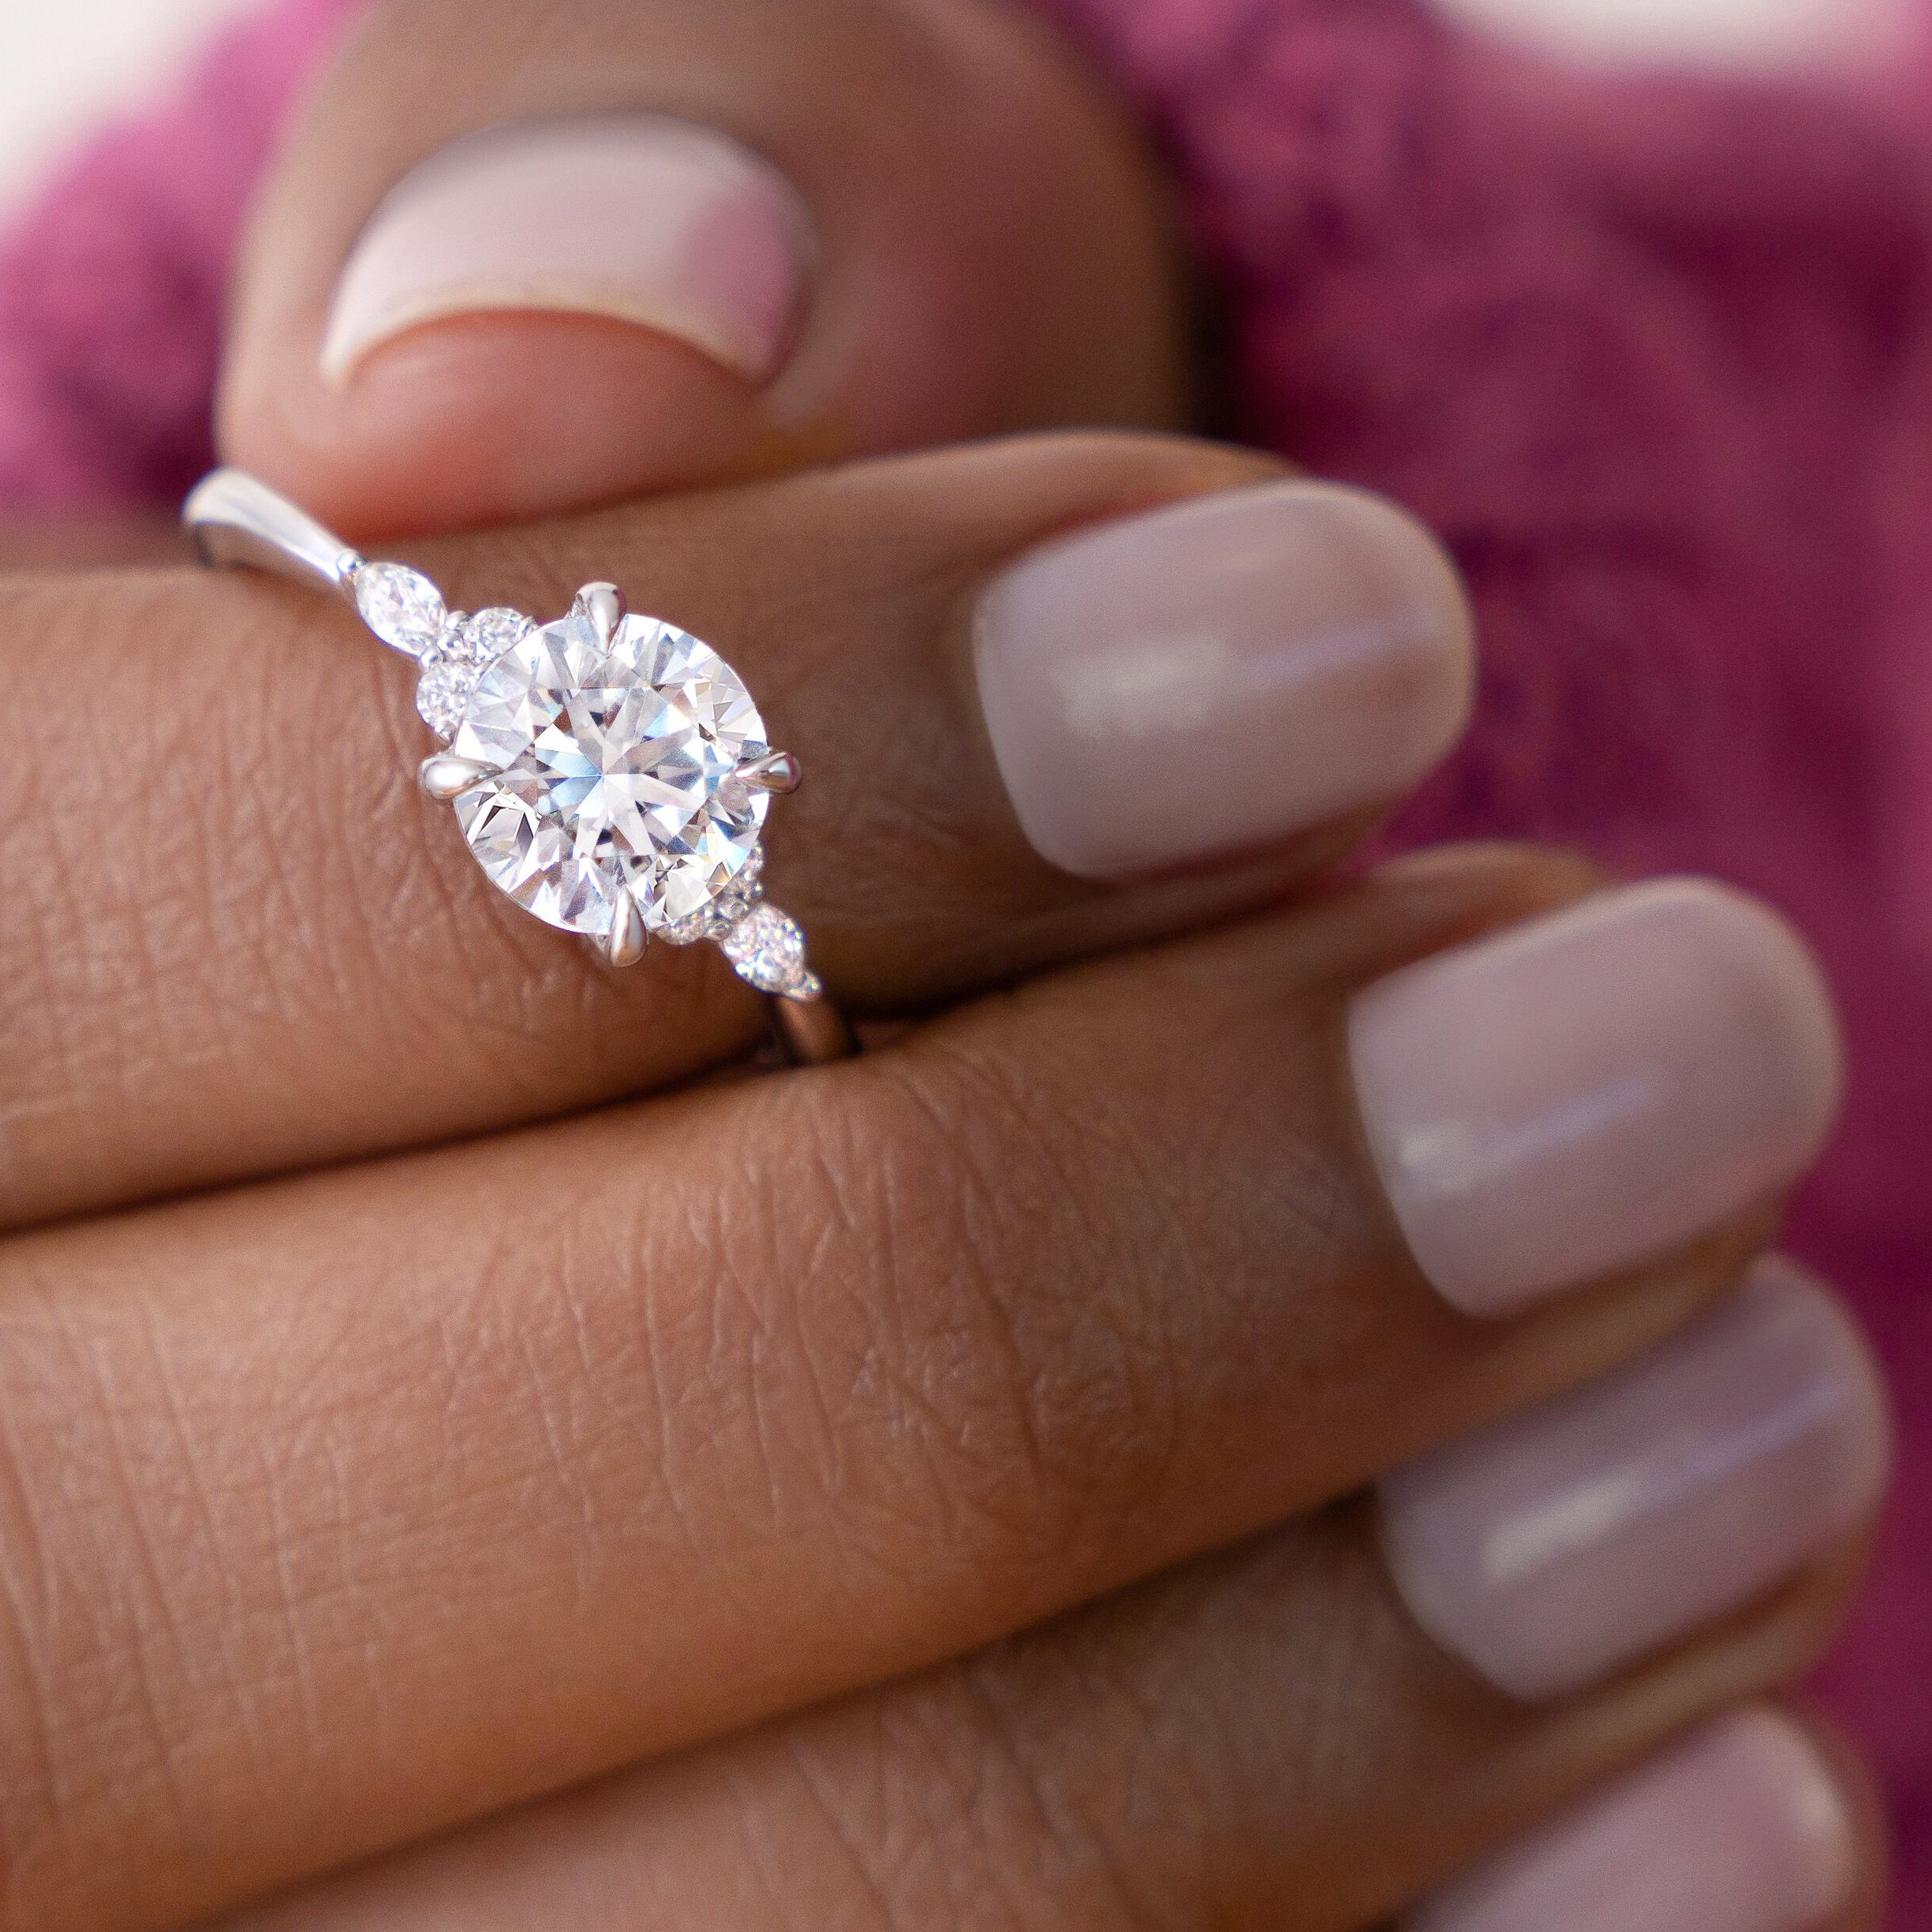 Engagement Rings Under $1,000 That Still Feel Luxe